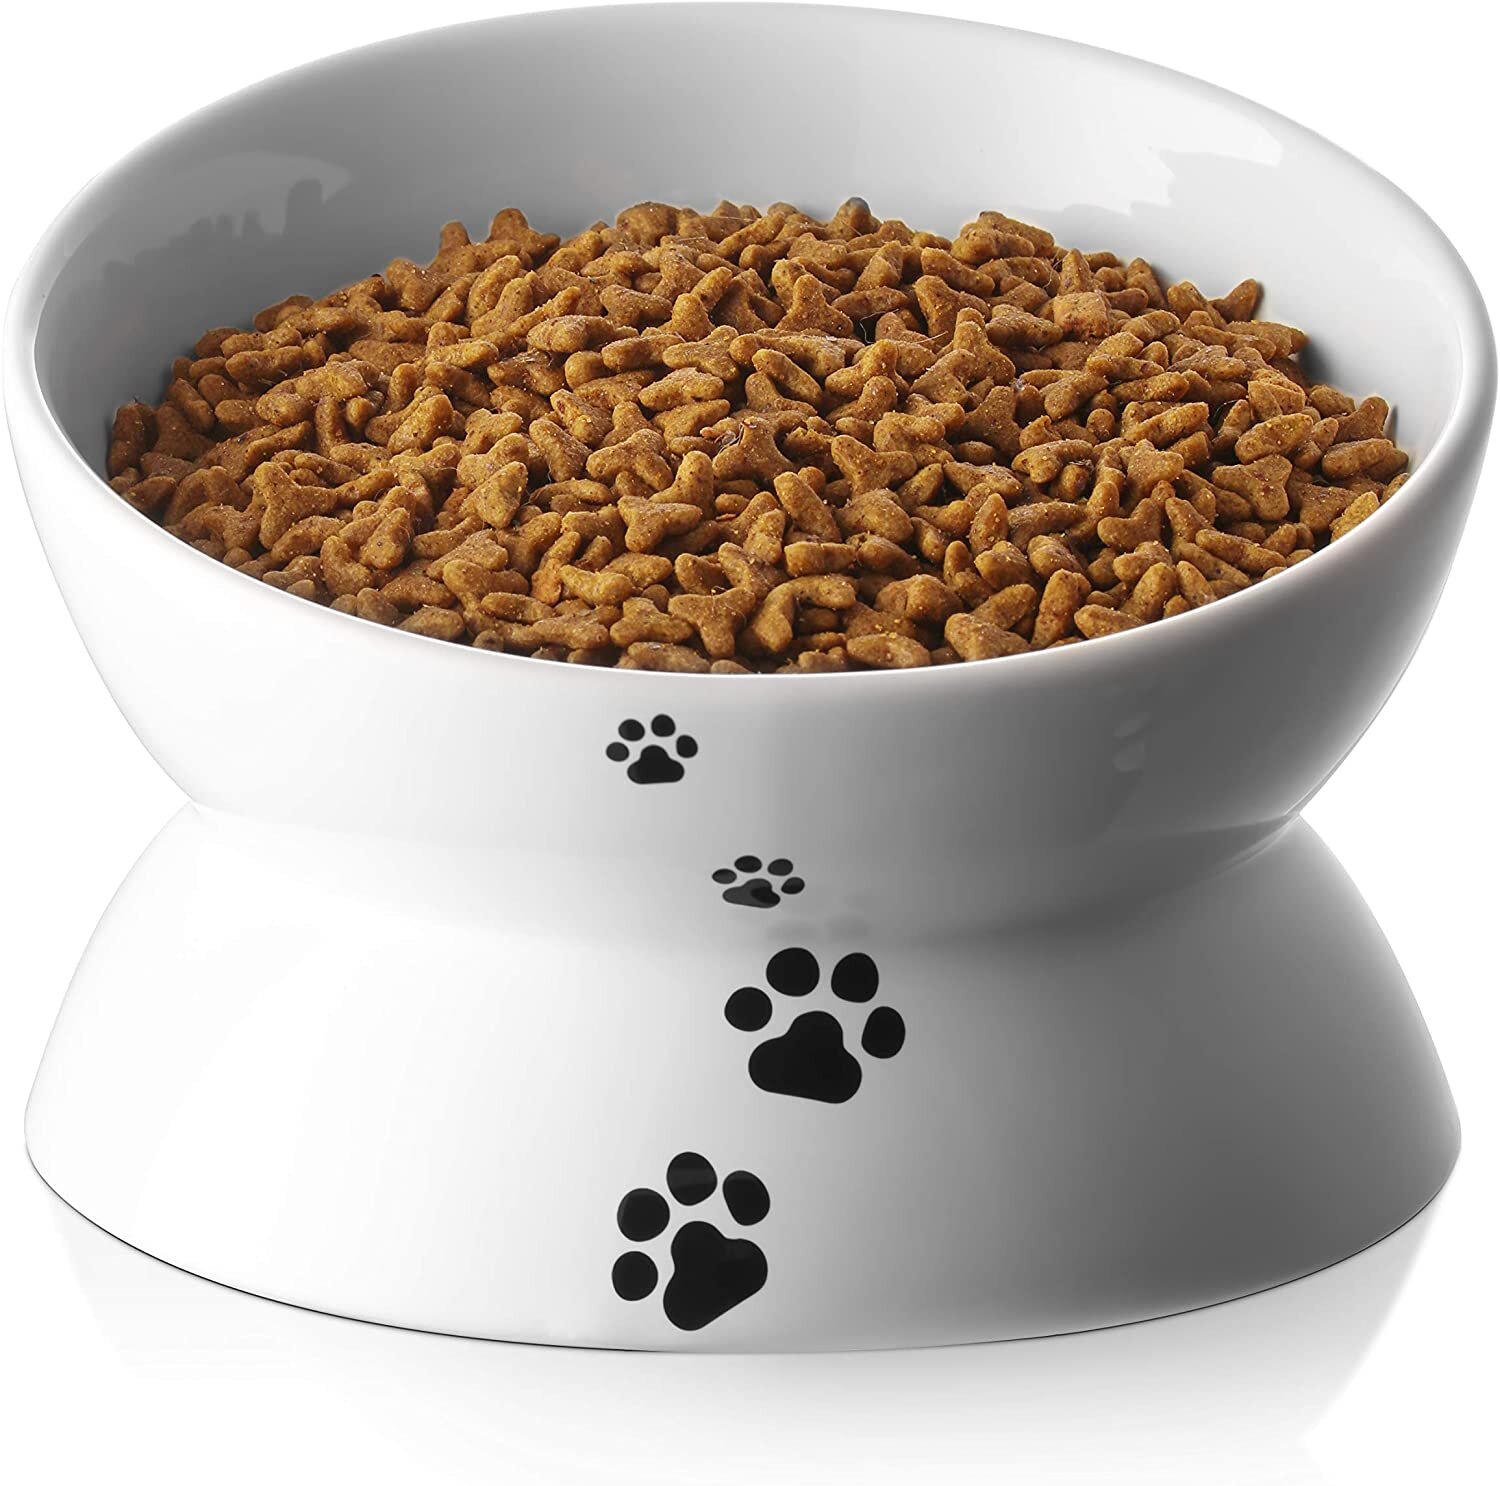 SUPER DESIGN 4 Piece Replacement Stainless Steel Bowls for Pet Feeding Station for Dogs and Cats， 1 Cup 